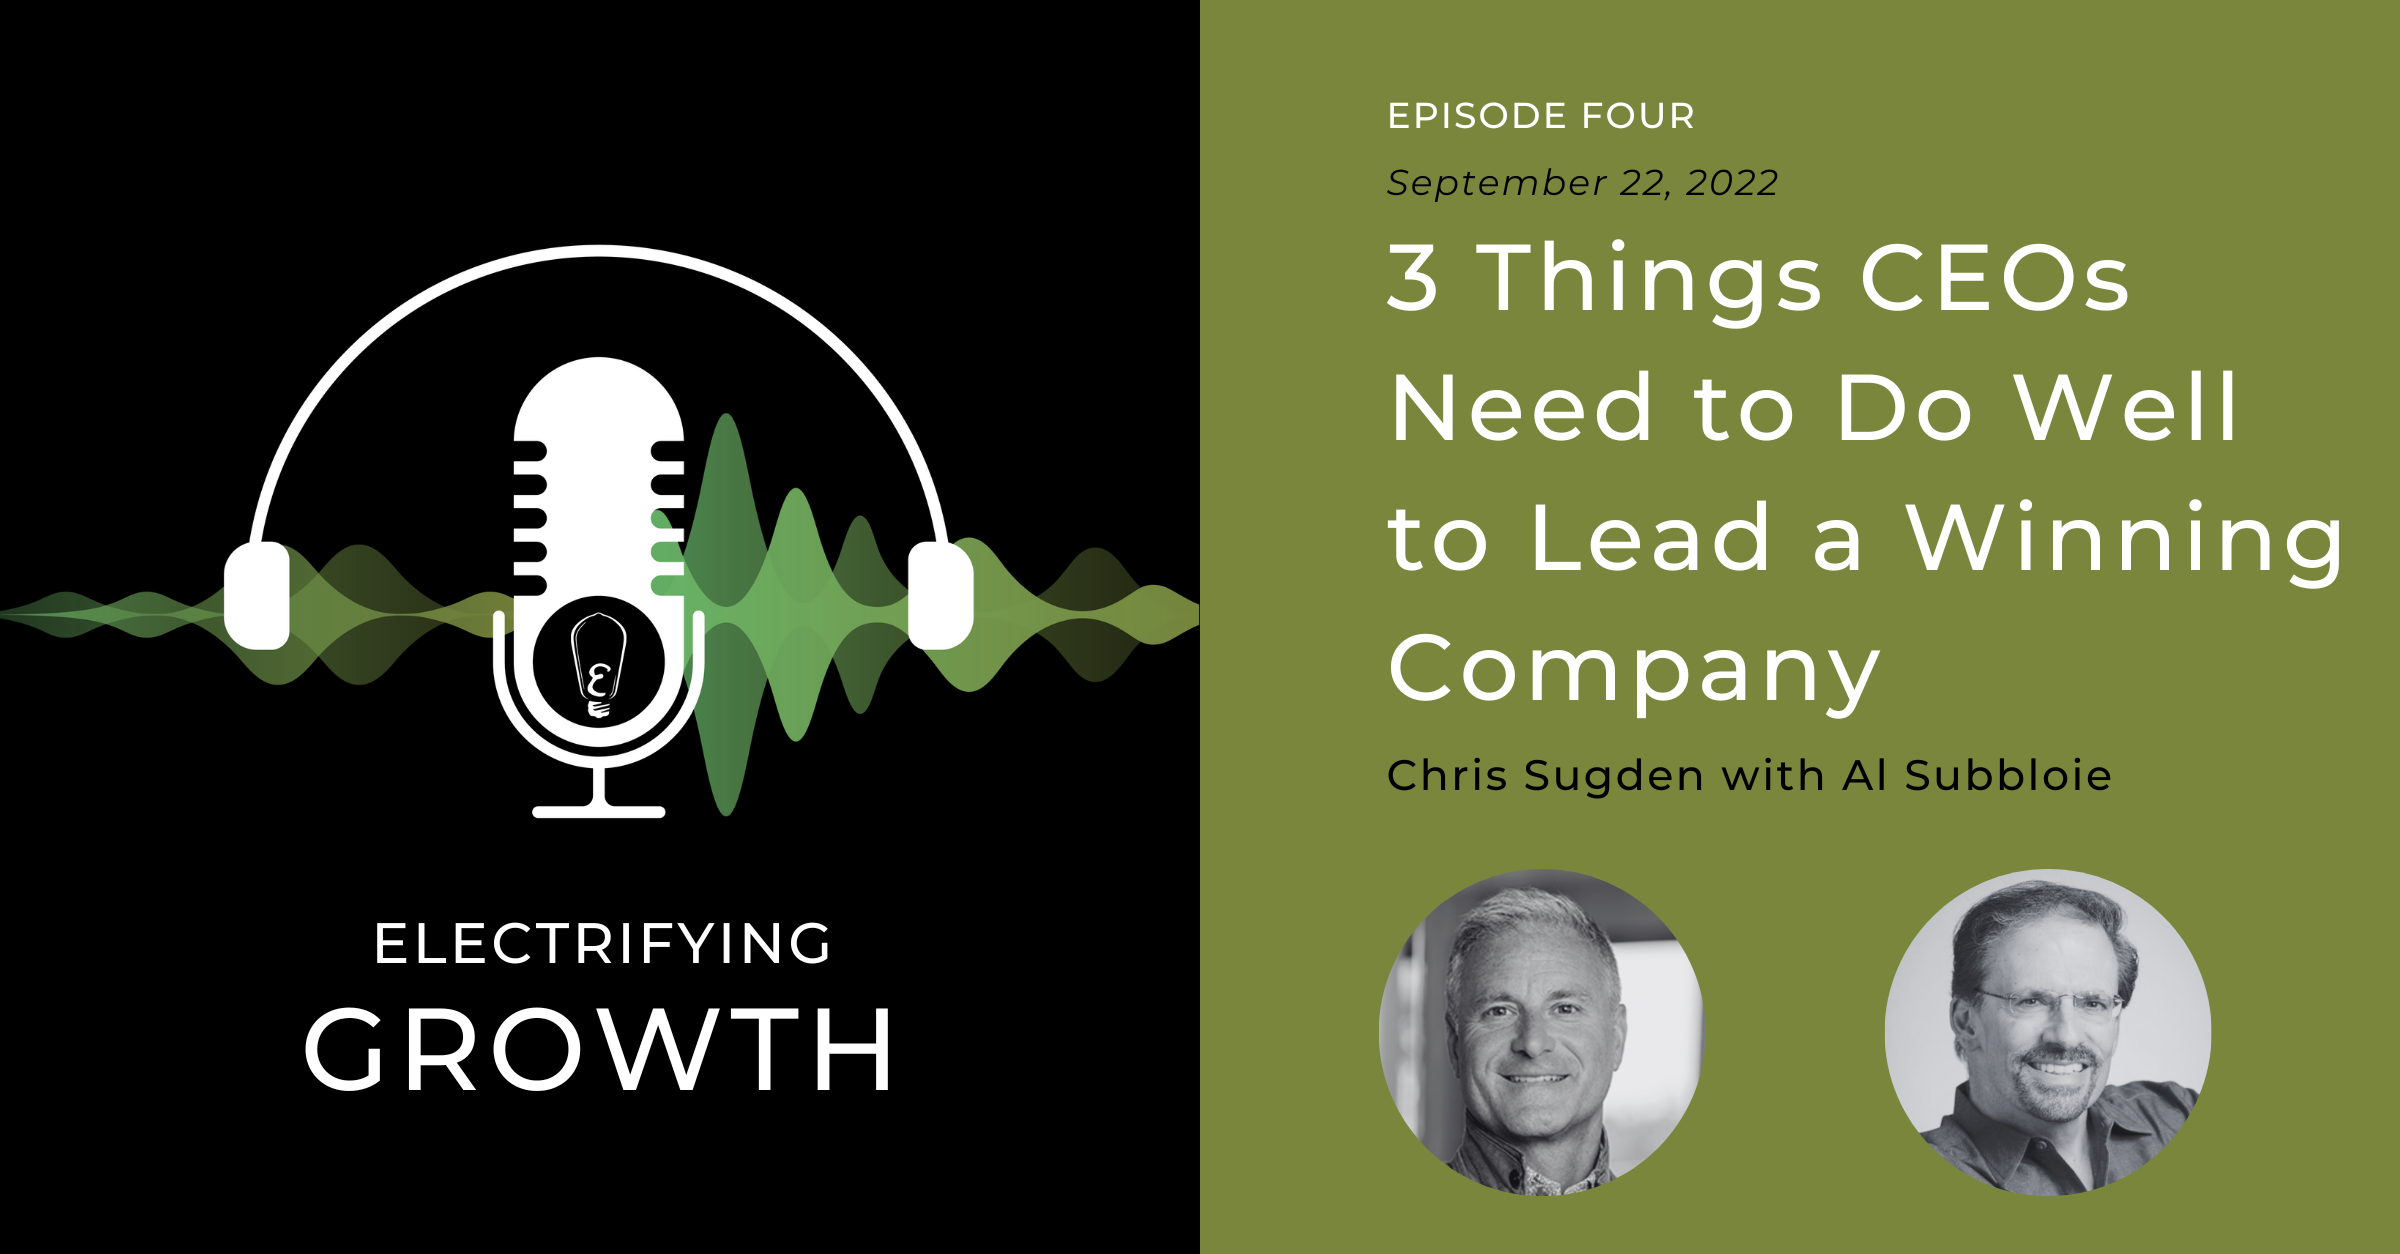 Electrifying Growth Episode 4: Three Things CEOs Need to Do Well to Lead a Winning Company